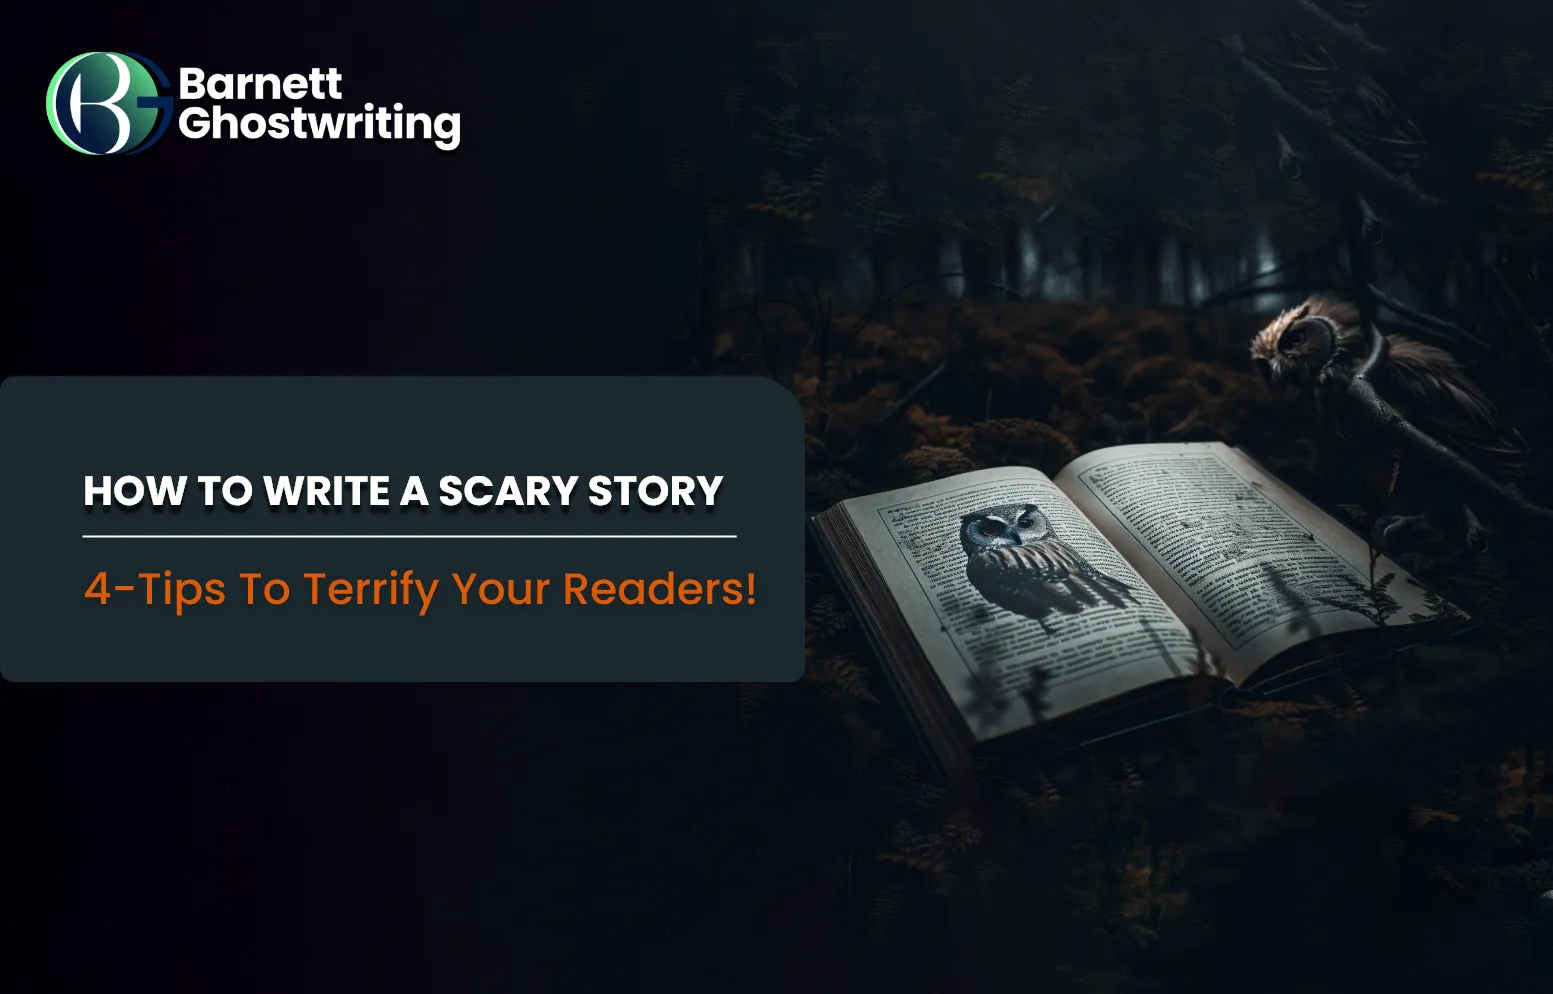 How to Write a Scary Story